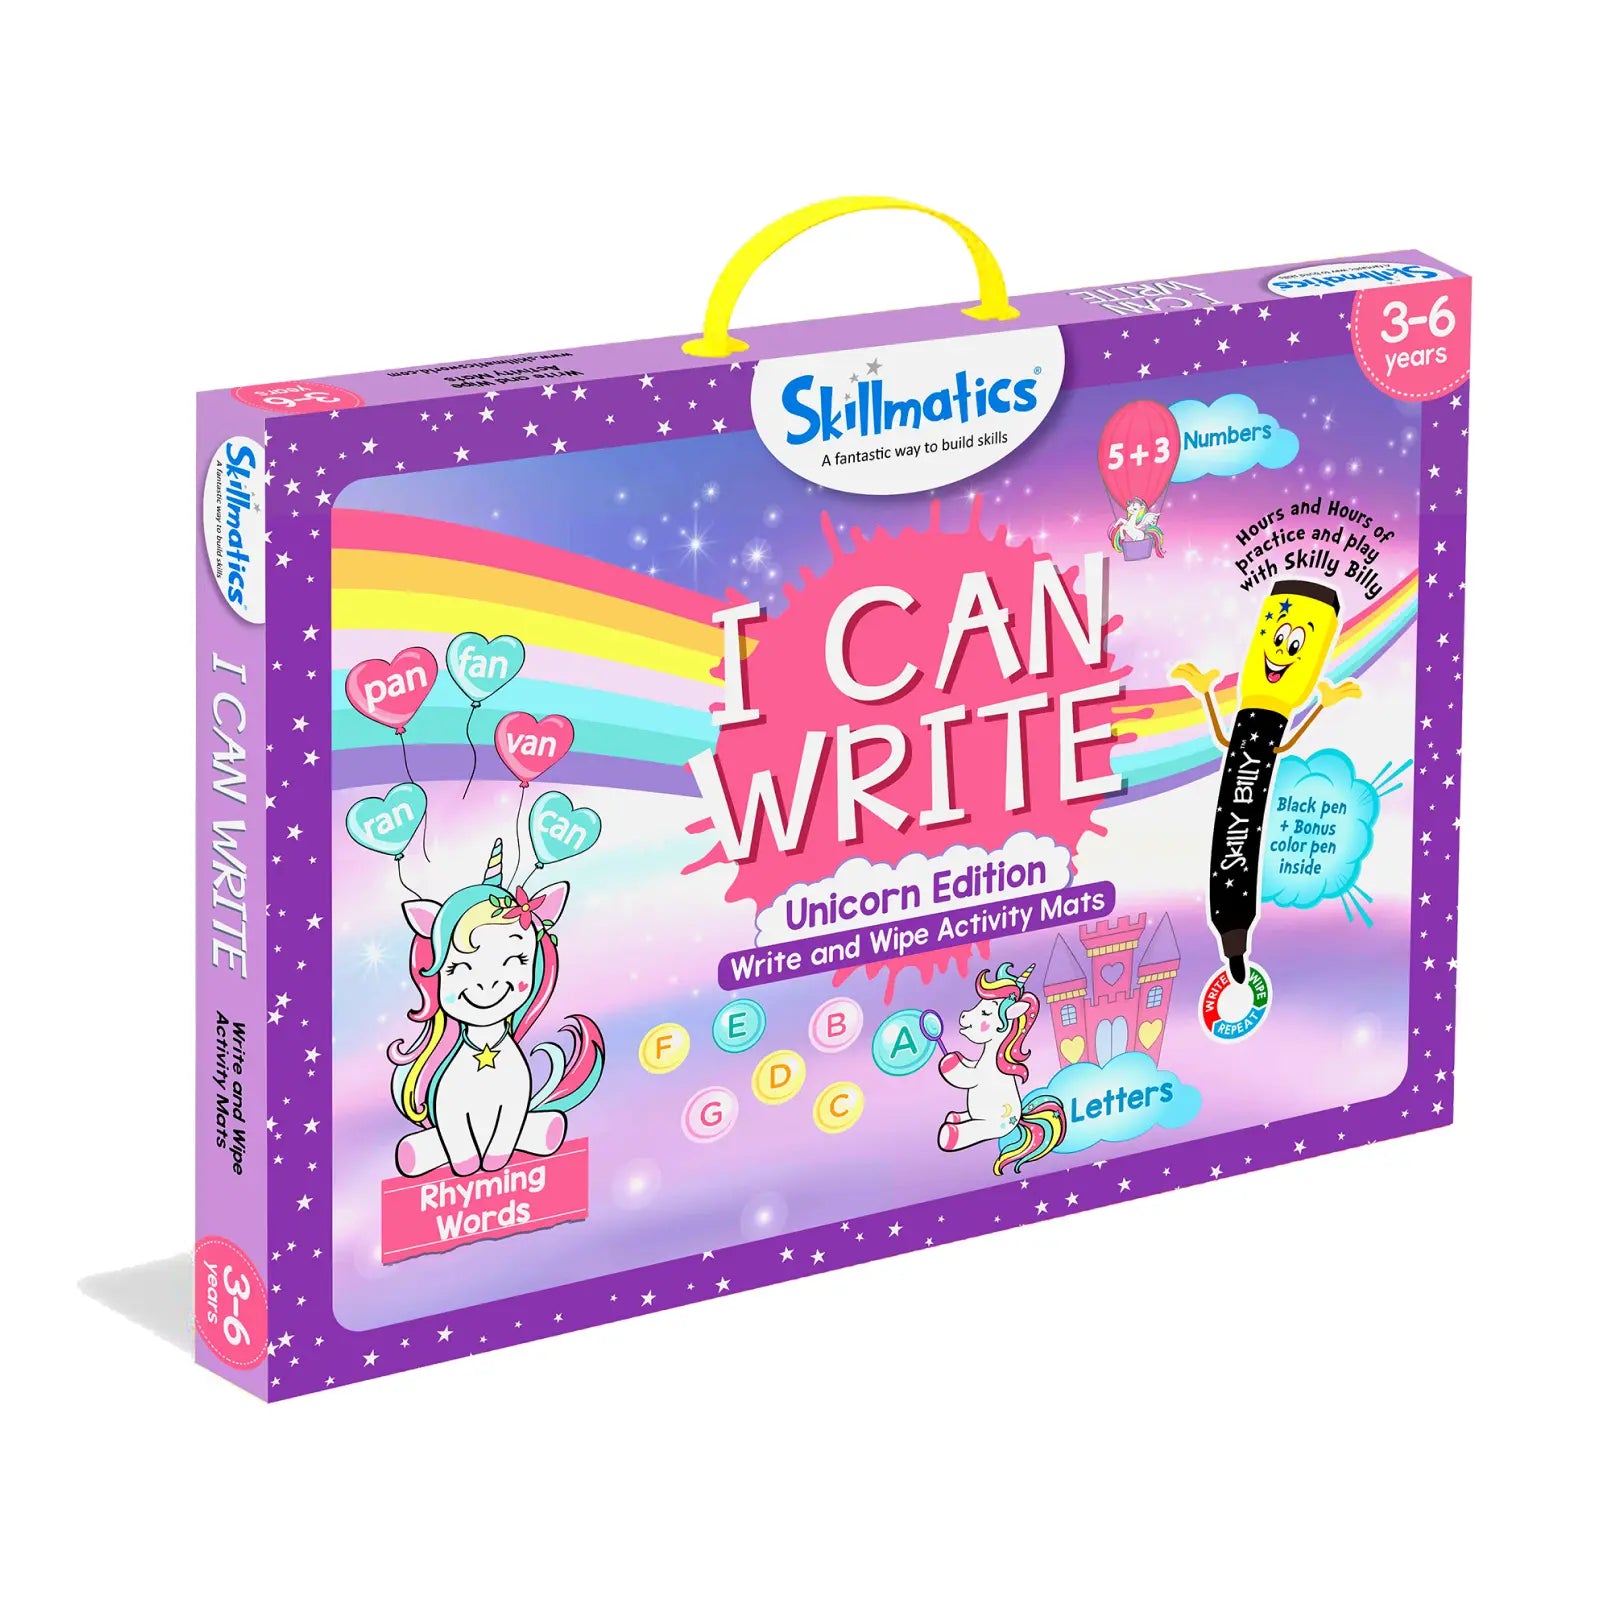 Kid's Stationery / Letter Writing Kit / Stationery for Kids / Toddler  Activity Set / Kid Letter Paper / Rainbow Paper 